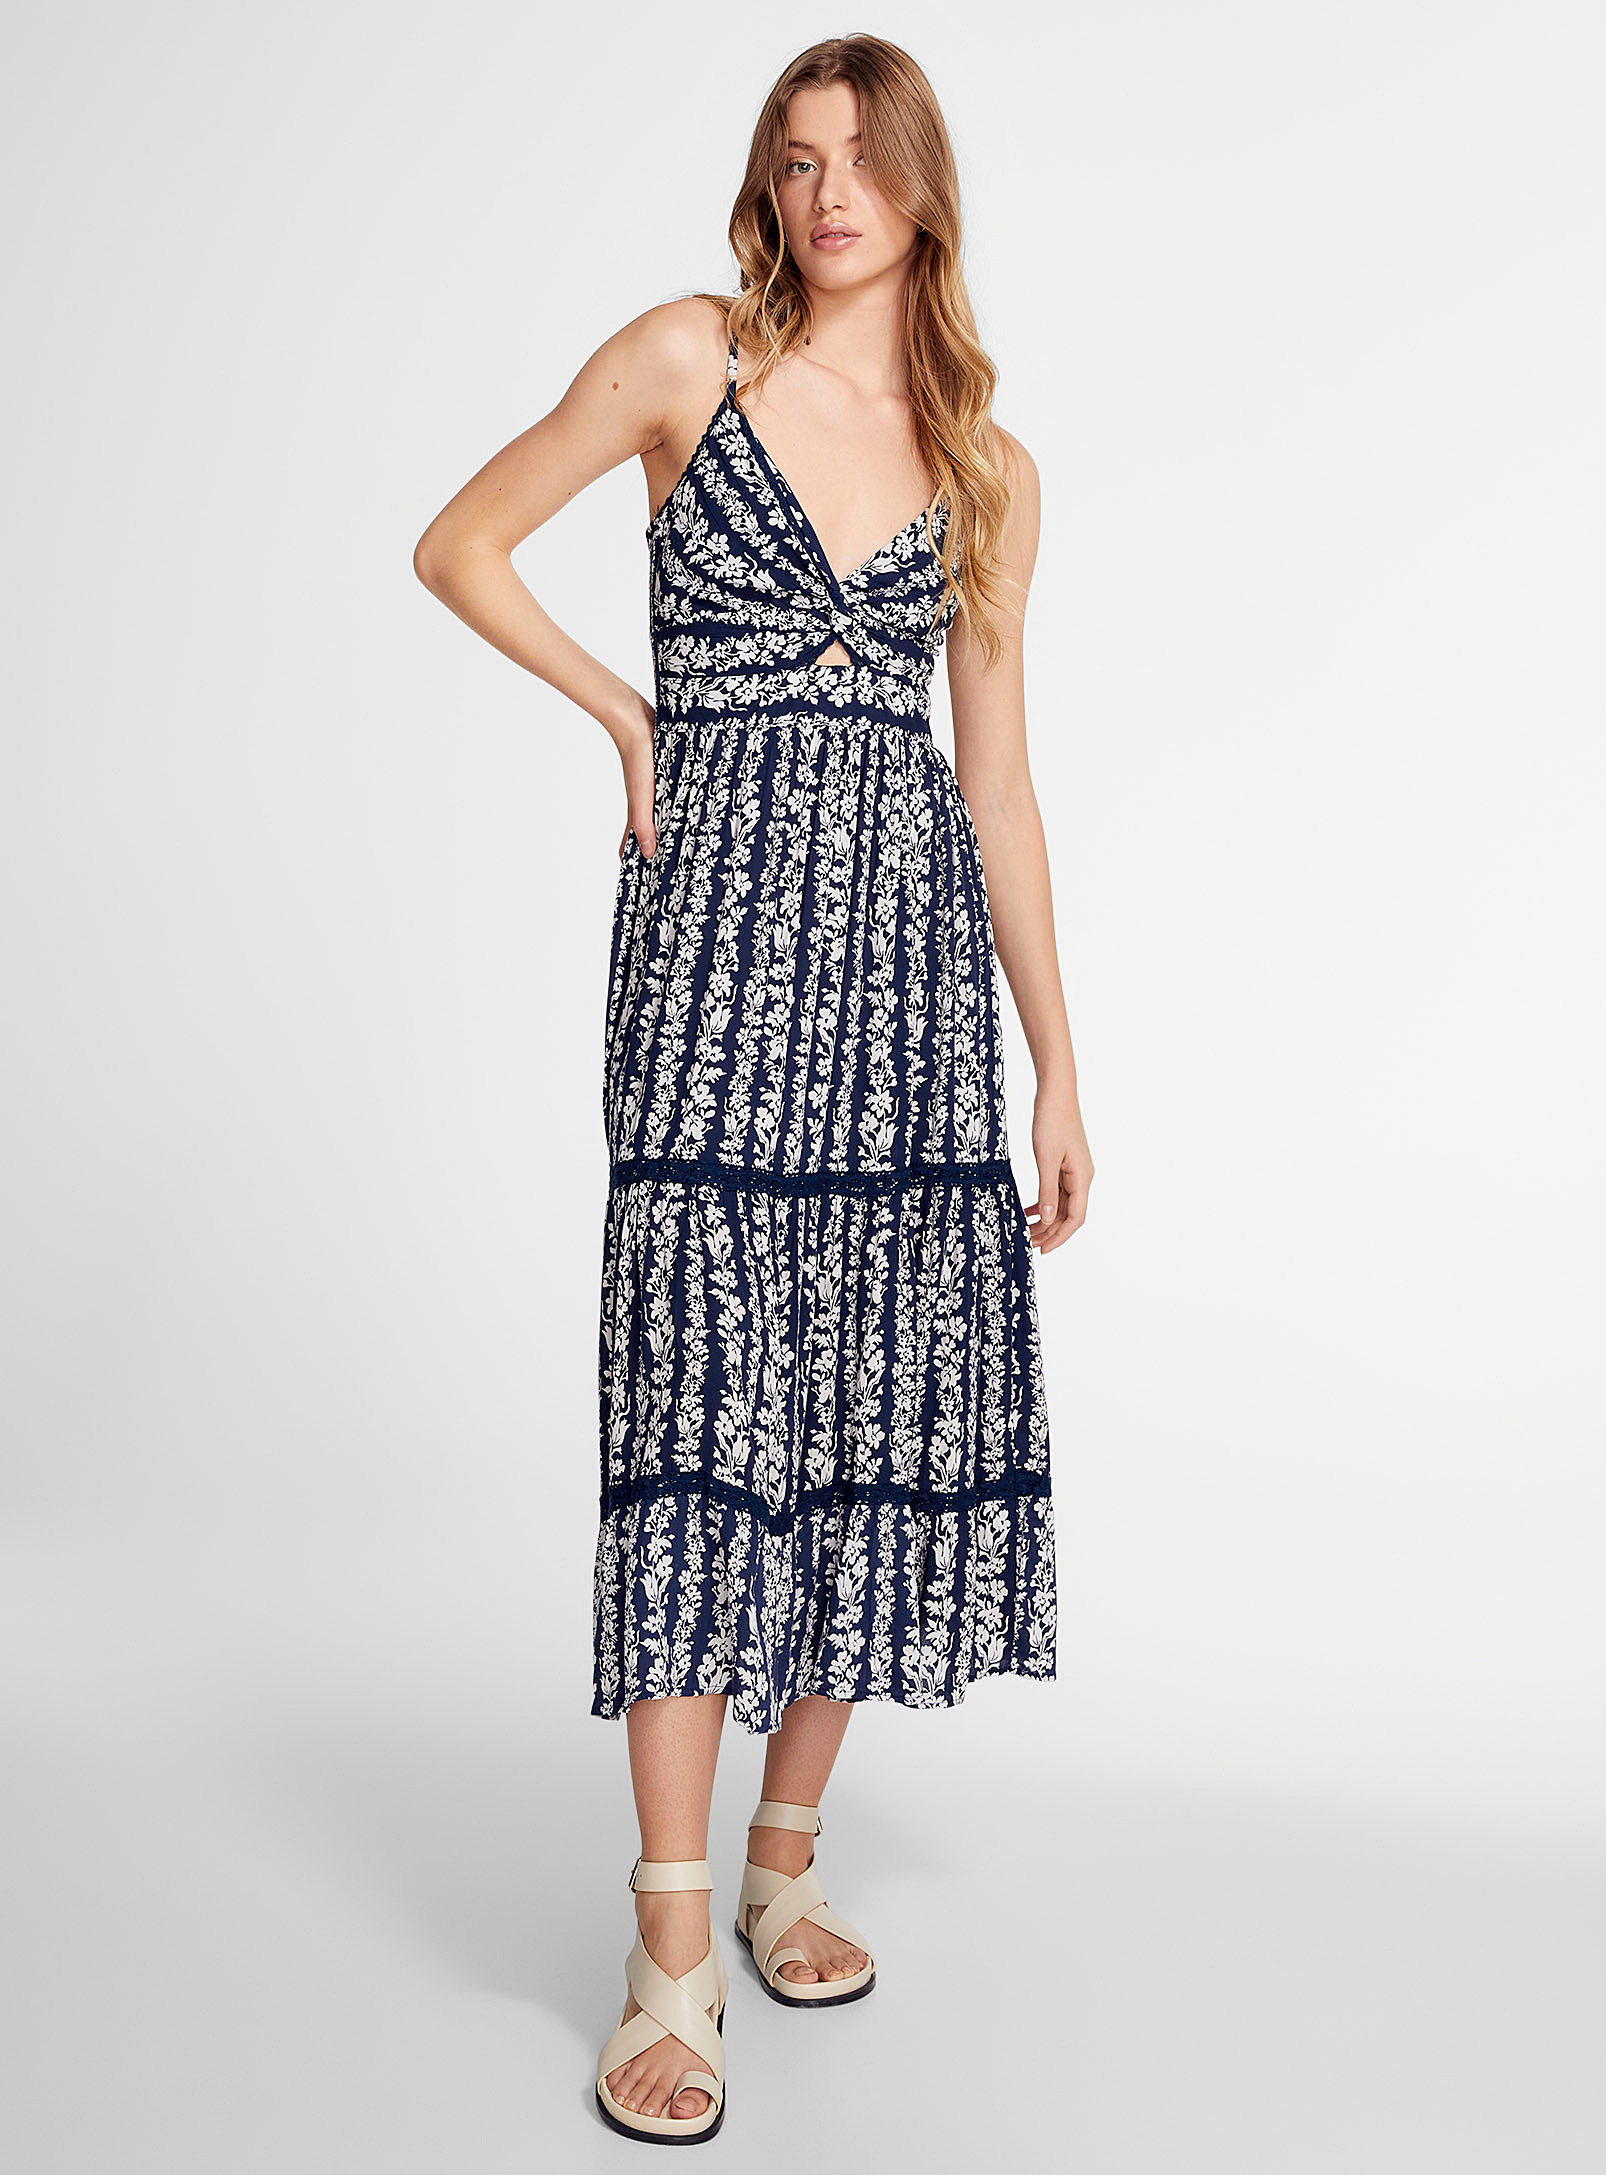 Icone Floral Fantasy Maxi Dress In Patterned Blue